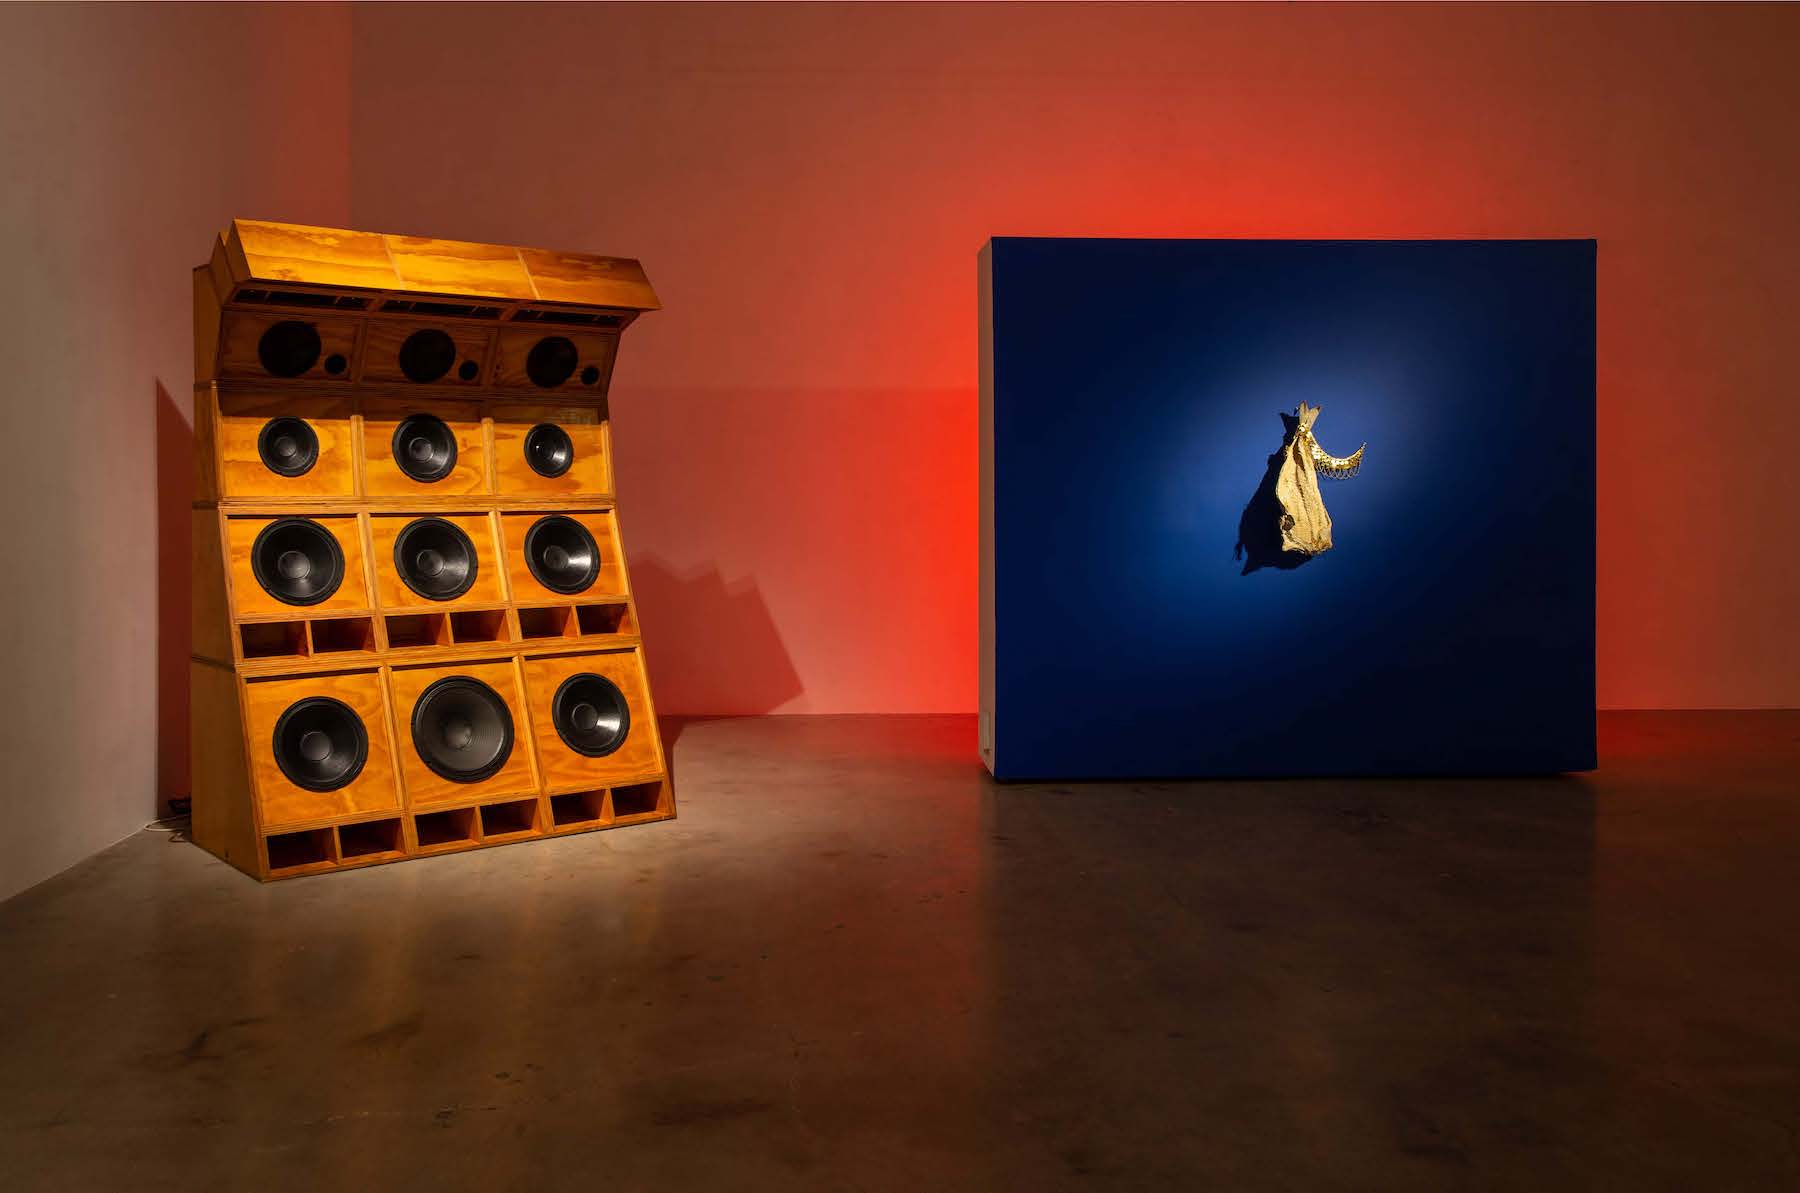 A large speaker placed next to a blue square that has an object attached to the middle.